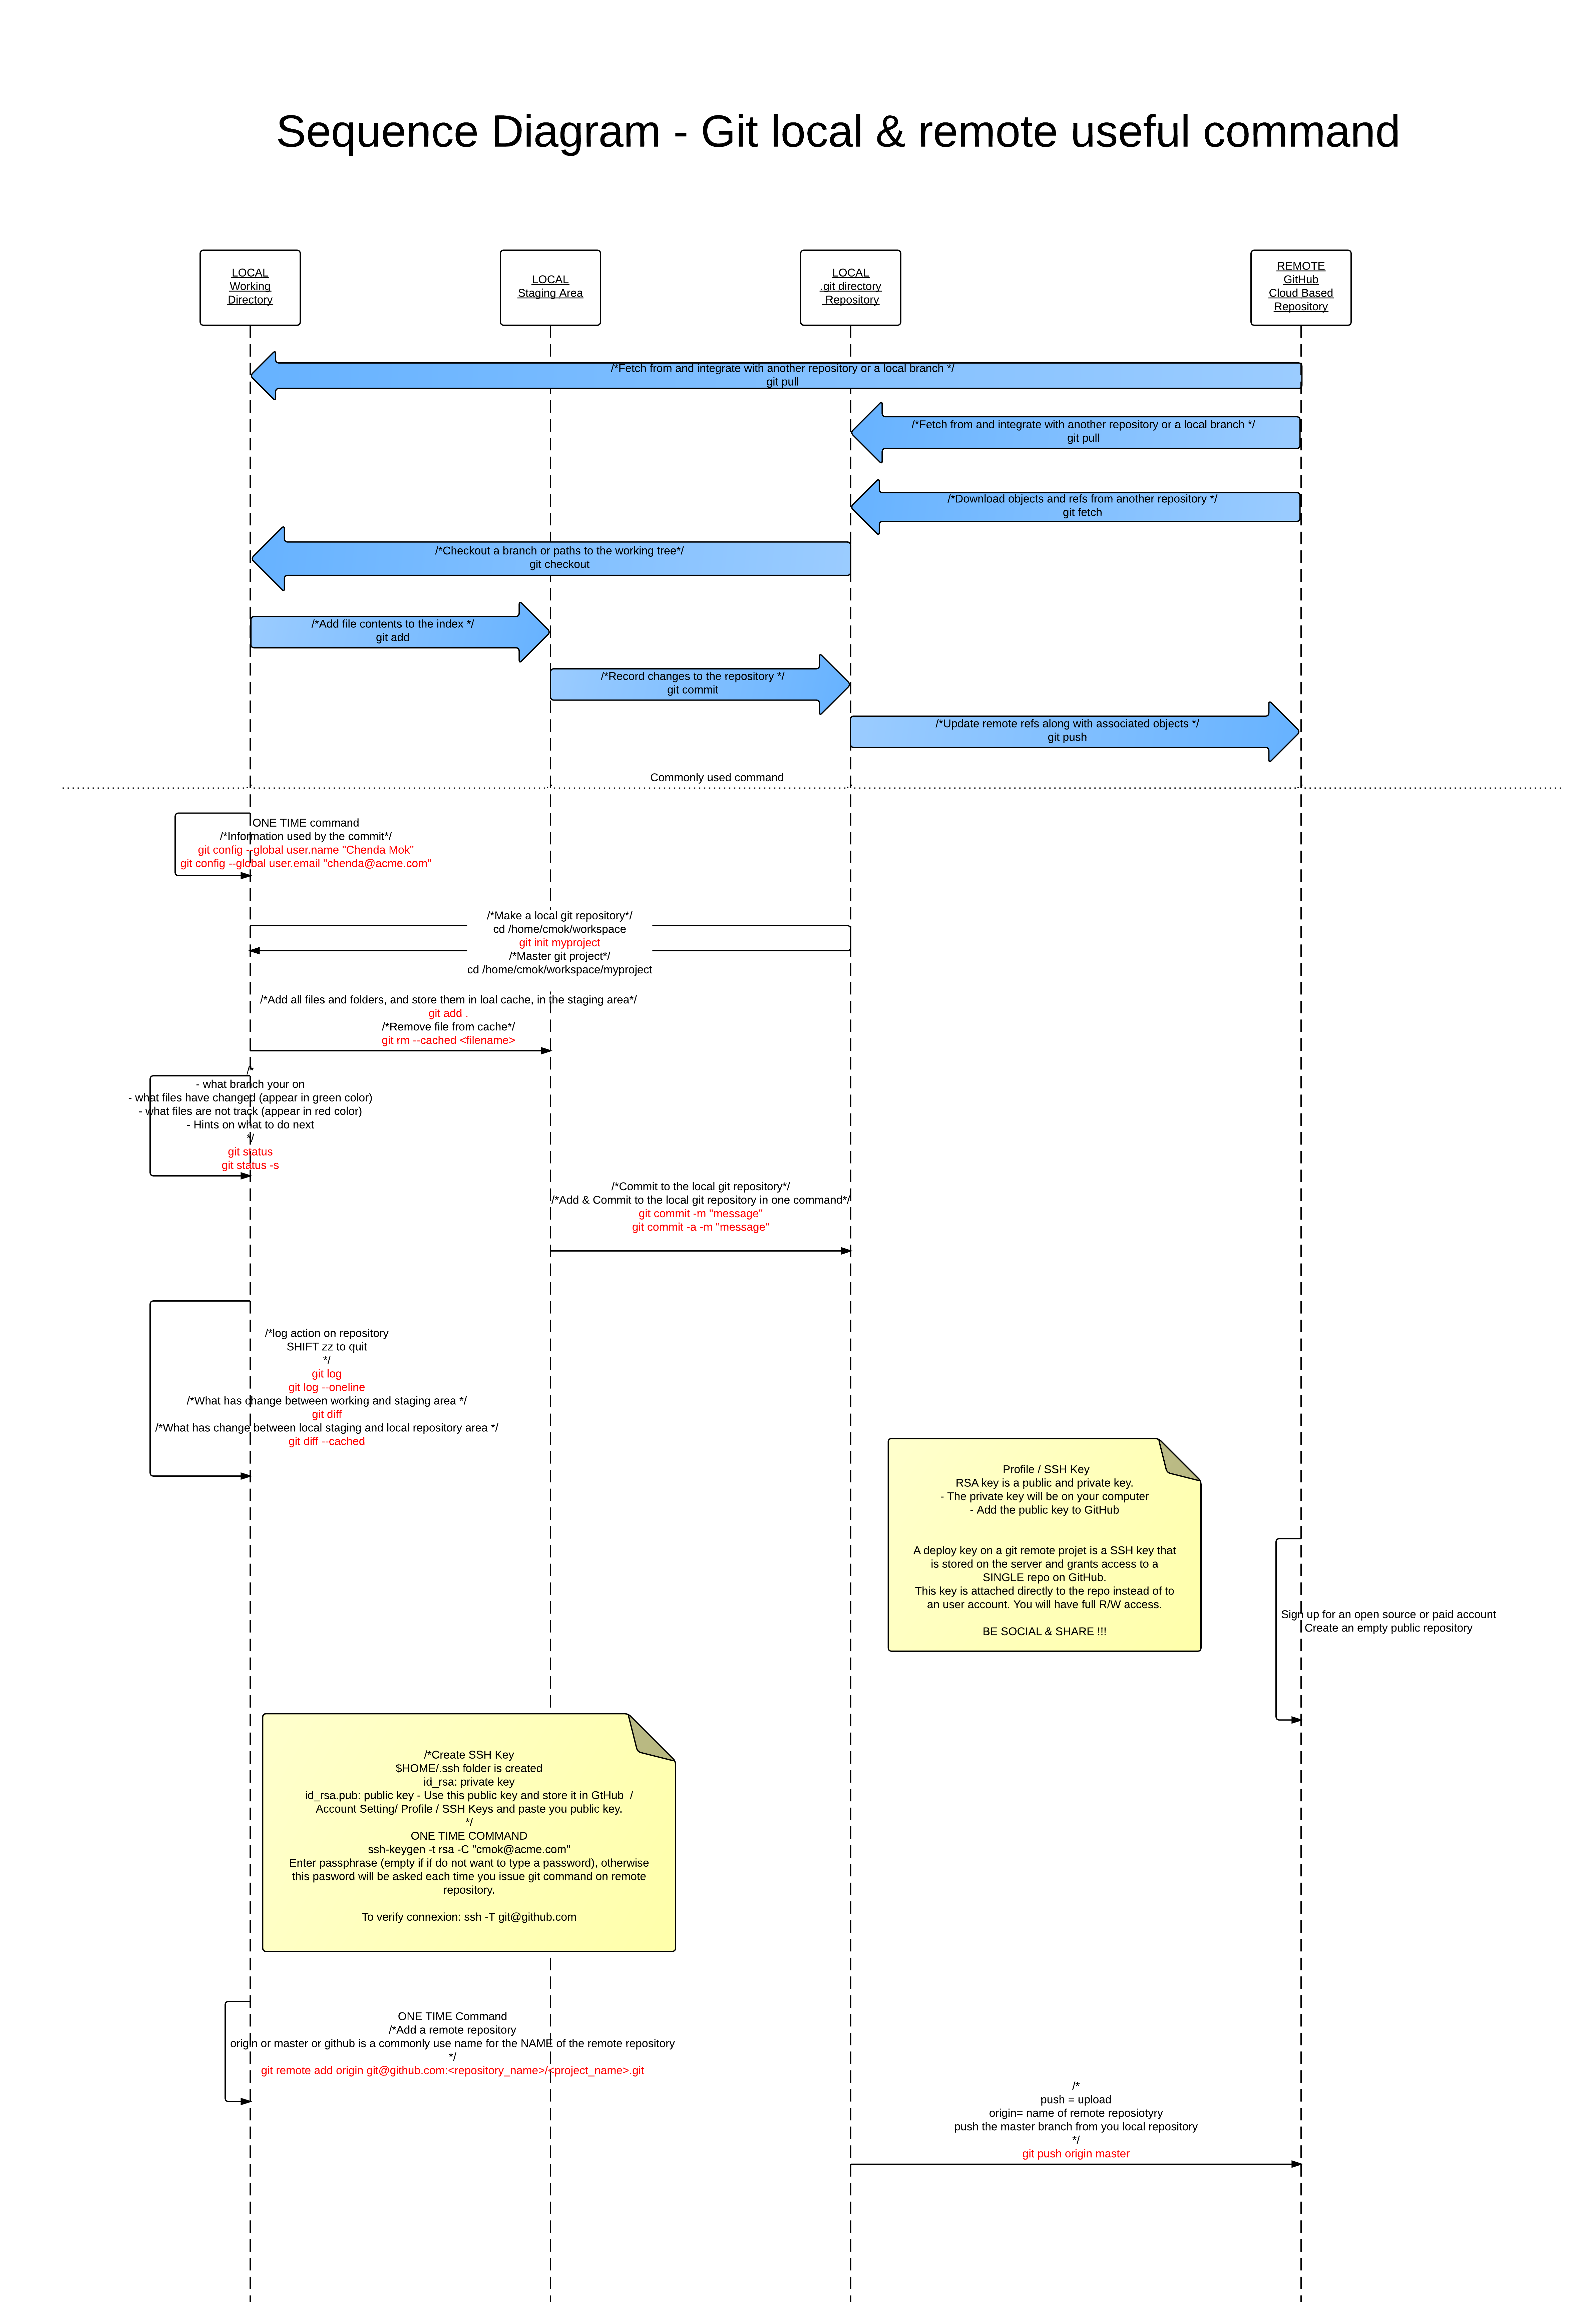 Sequence Diagram for a git usage (remote and local) with ...